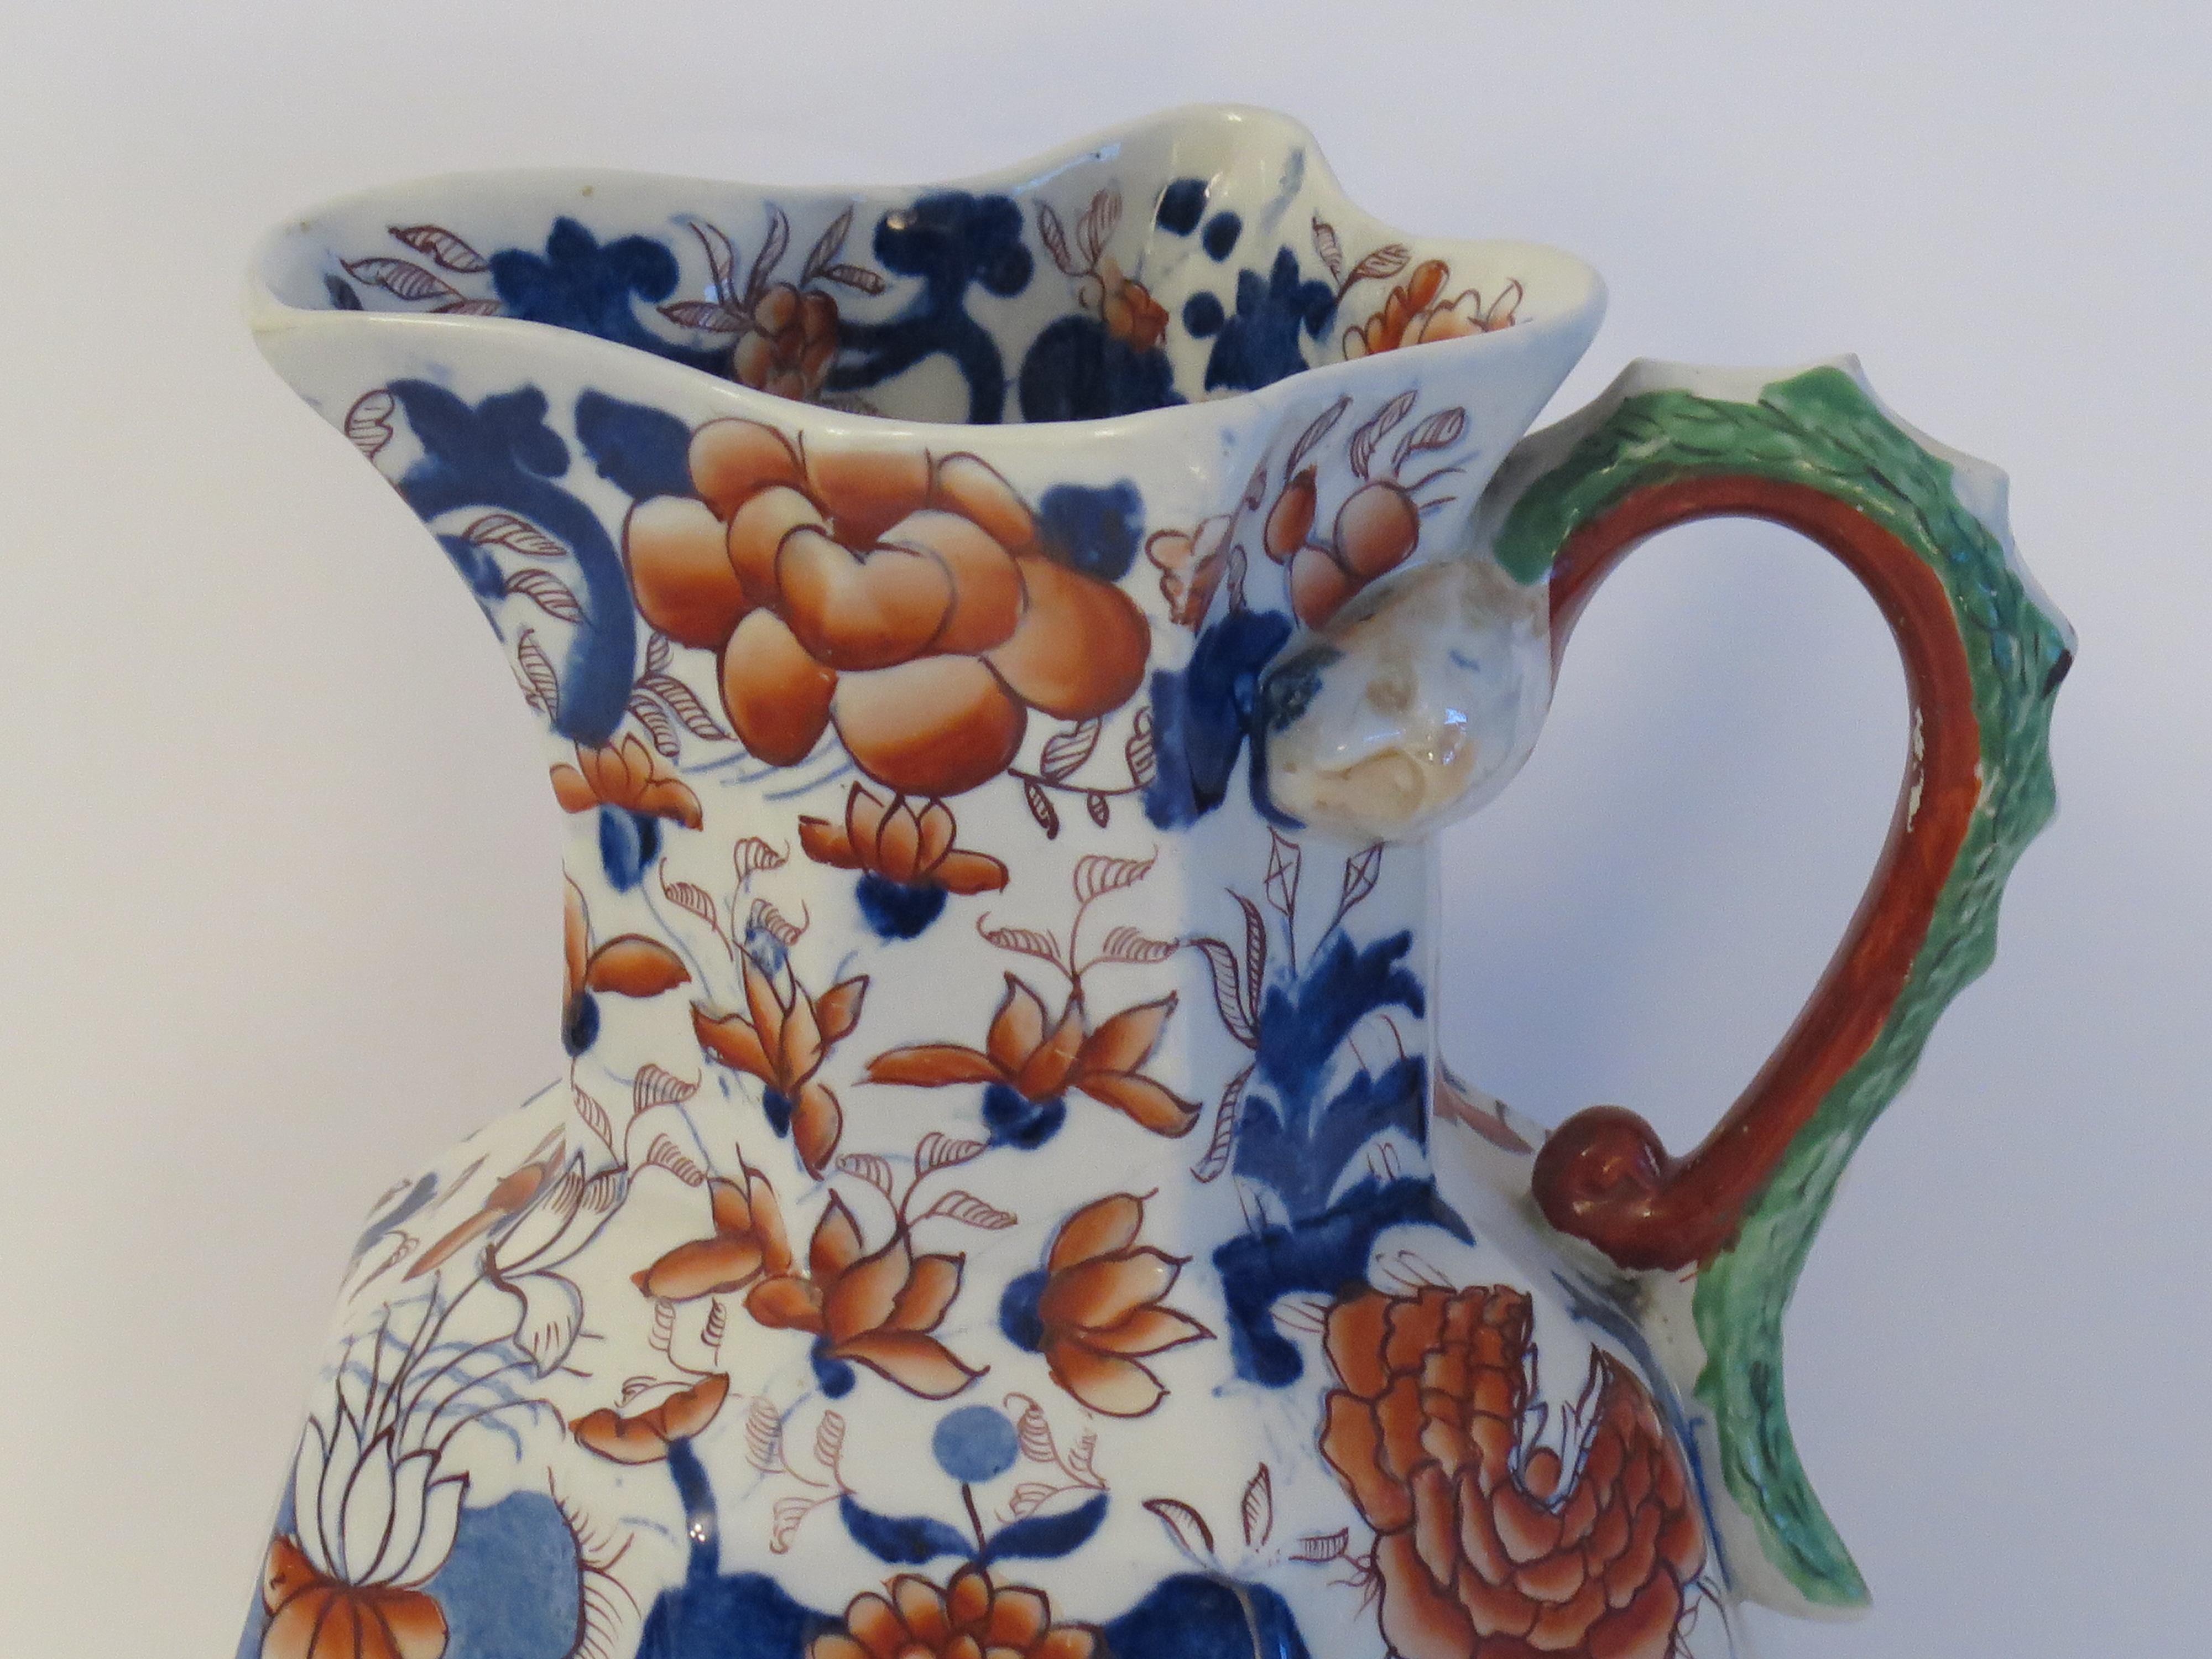 This is a very good, early and very large Mason's Ironstone Hydra jug or pitcher in the Basket Japan pattern, made in the English, late Georgian period, circa 1813-1820.

This jug is particularly decorative, being a much larger size than we normally